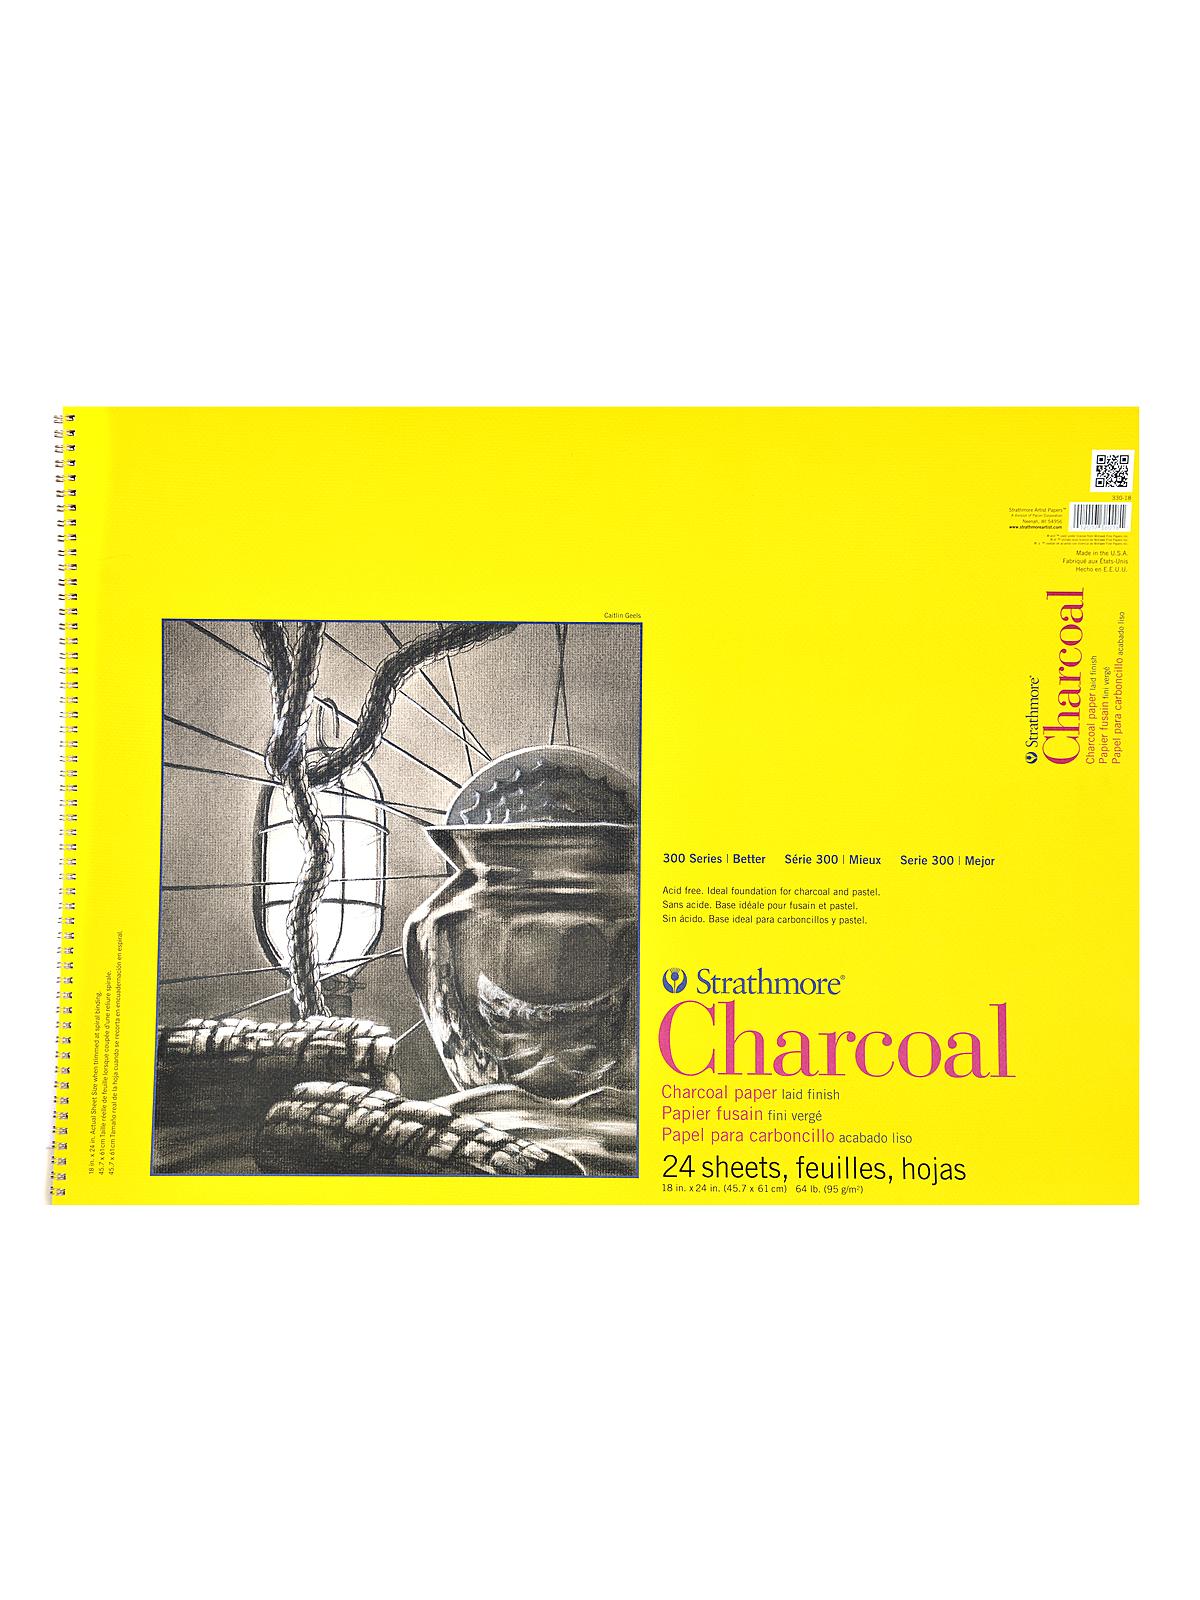 300 Series Charcoal Paper Pads 18 In. X 24 In. 24 Sheets